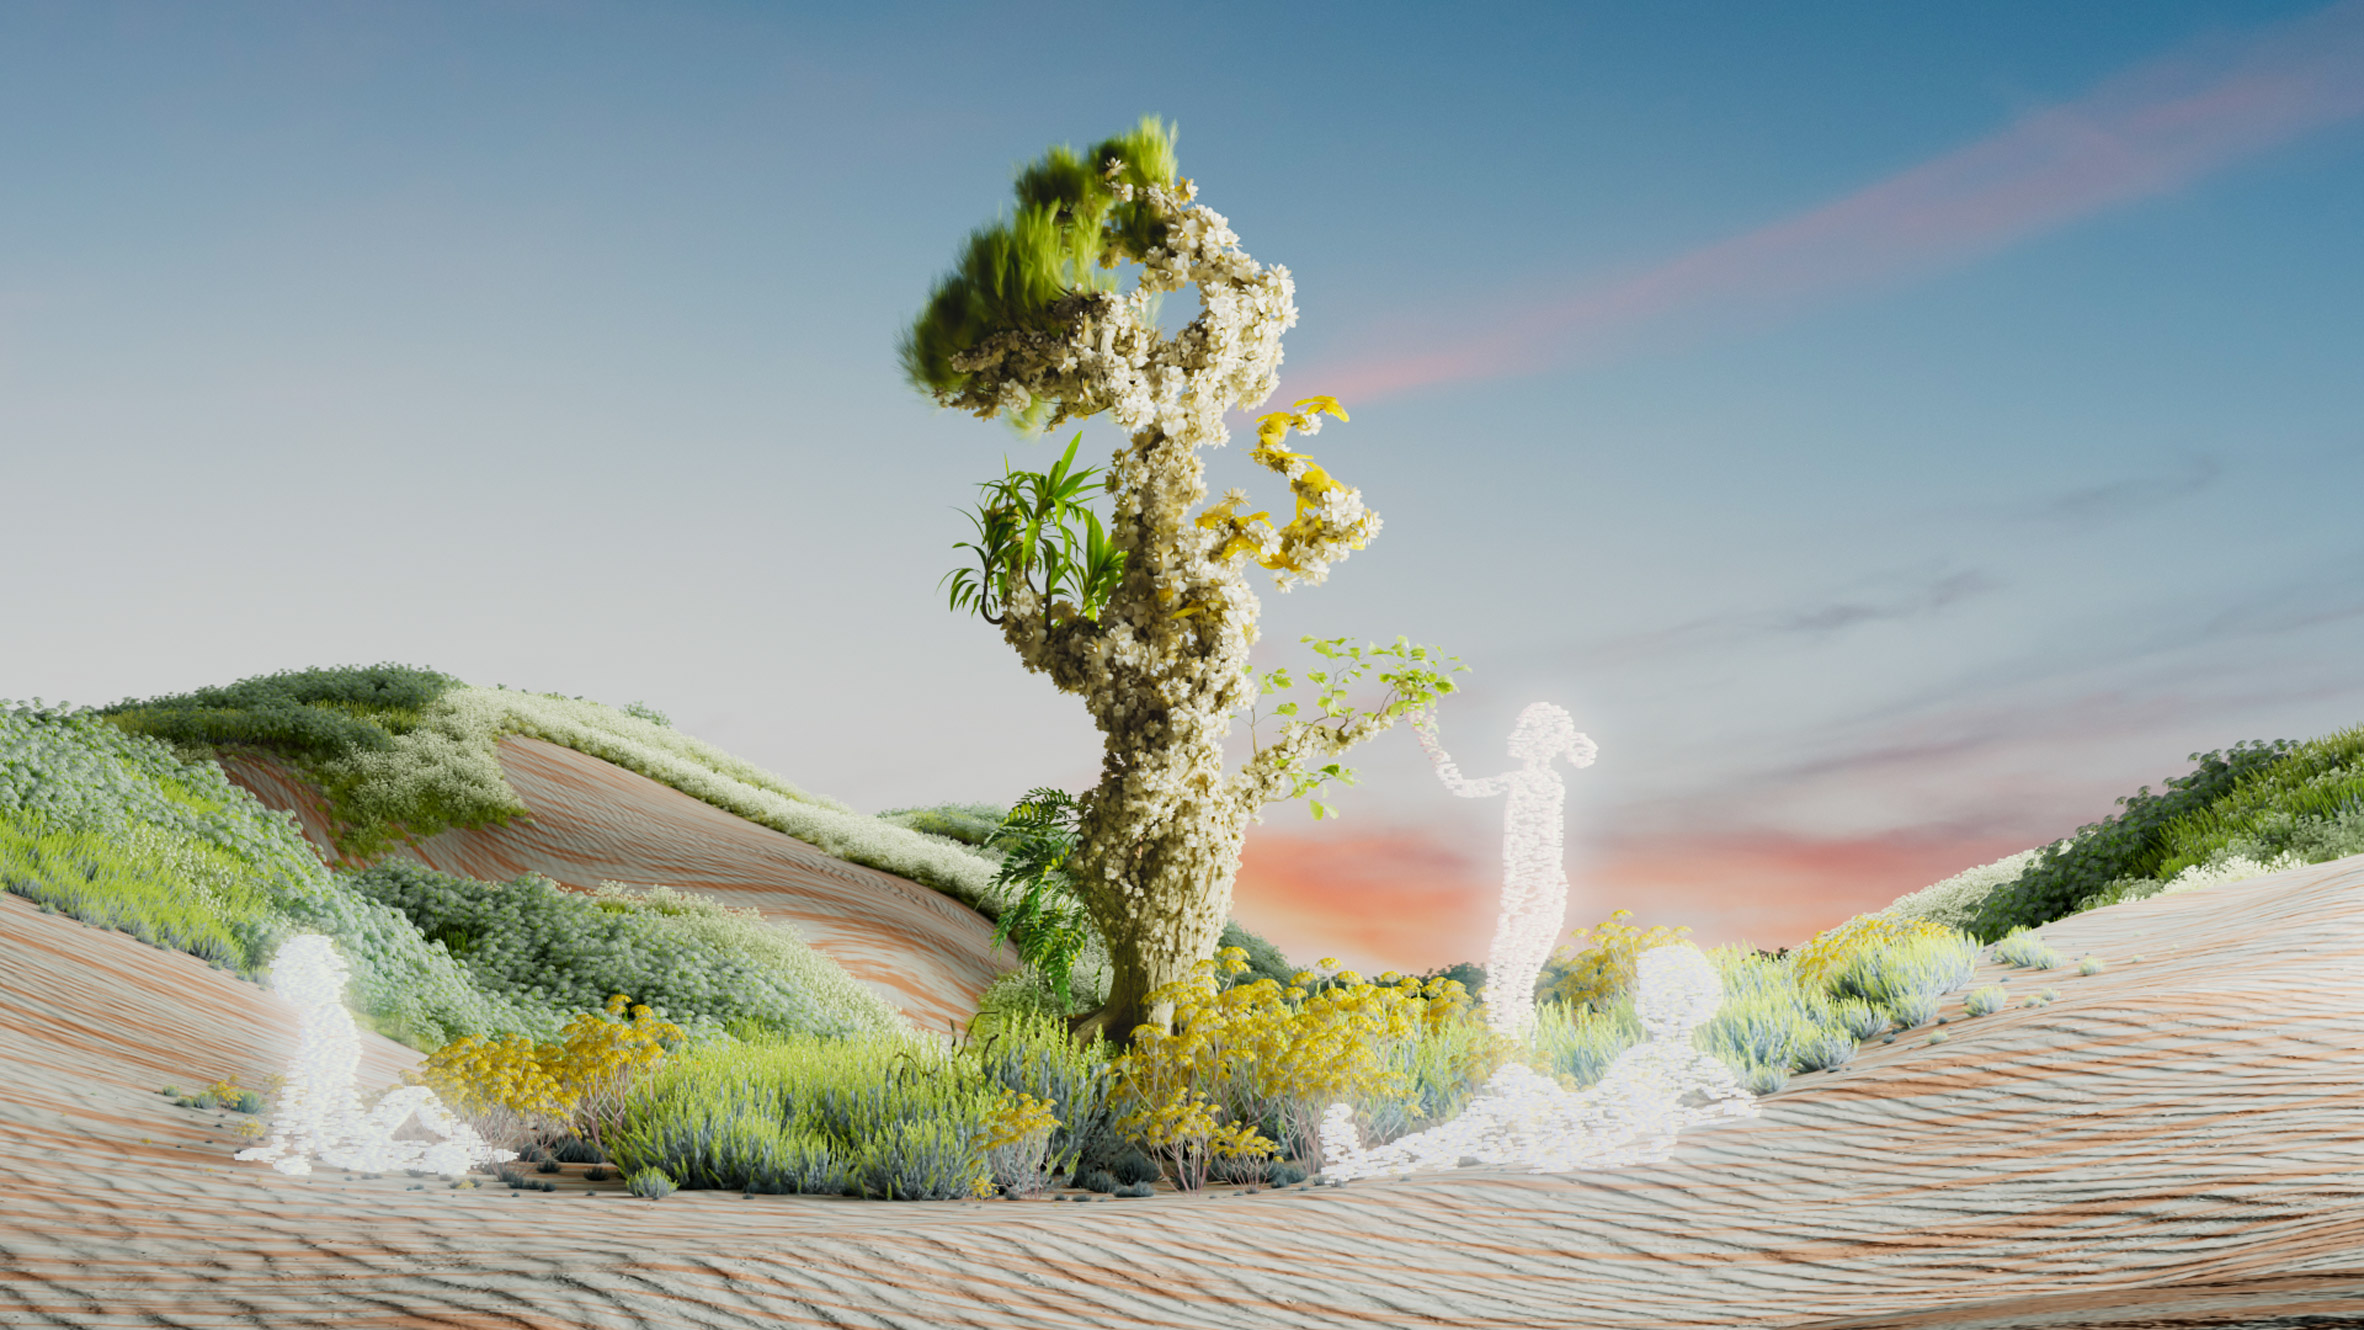 Visualisation of an otherworldly digital environment where glowing white figures interact with a tall, majestic tree